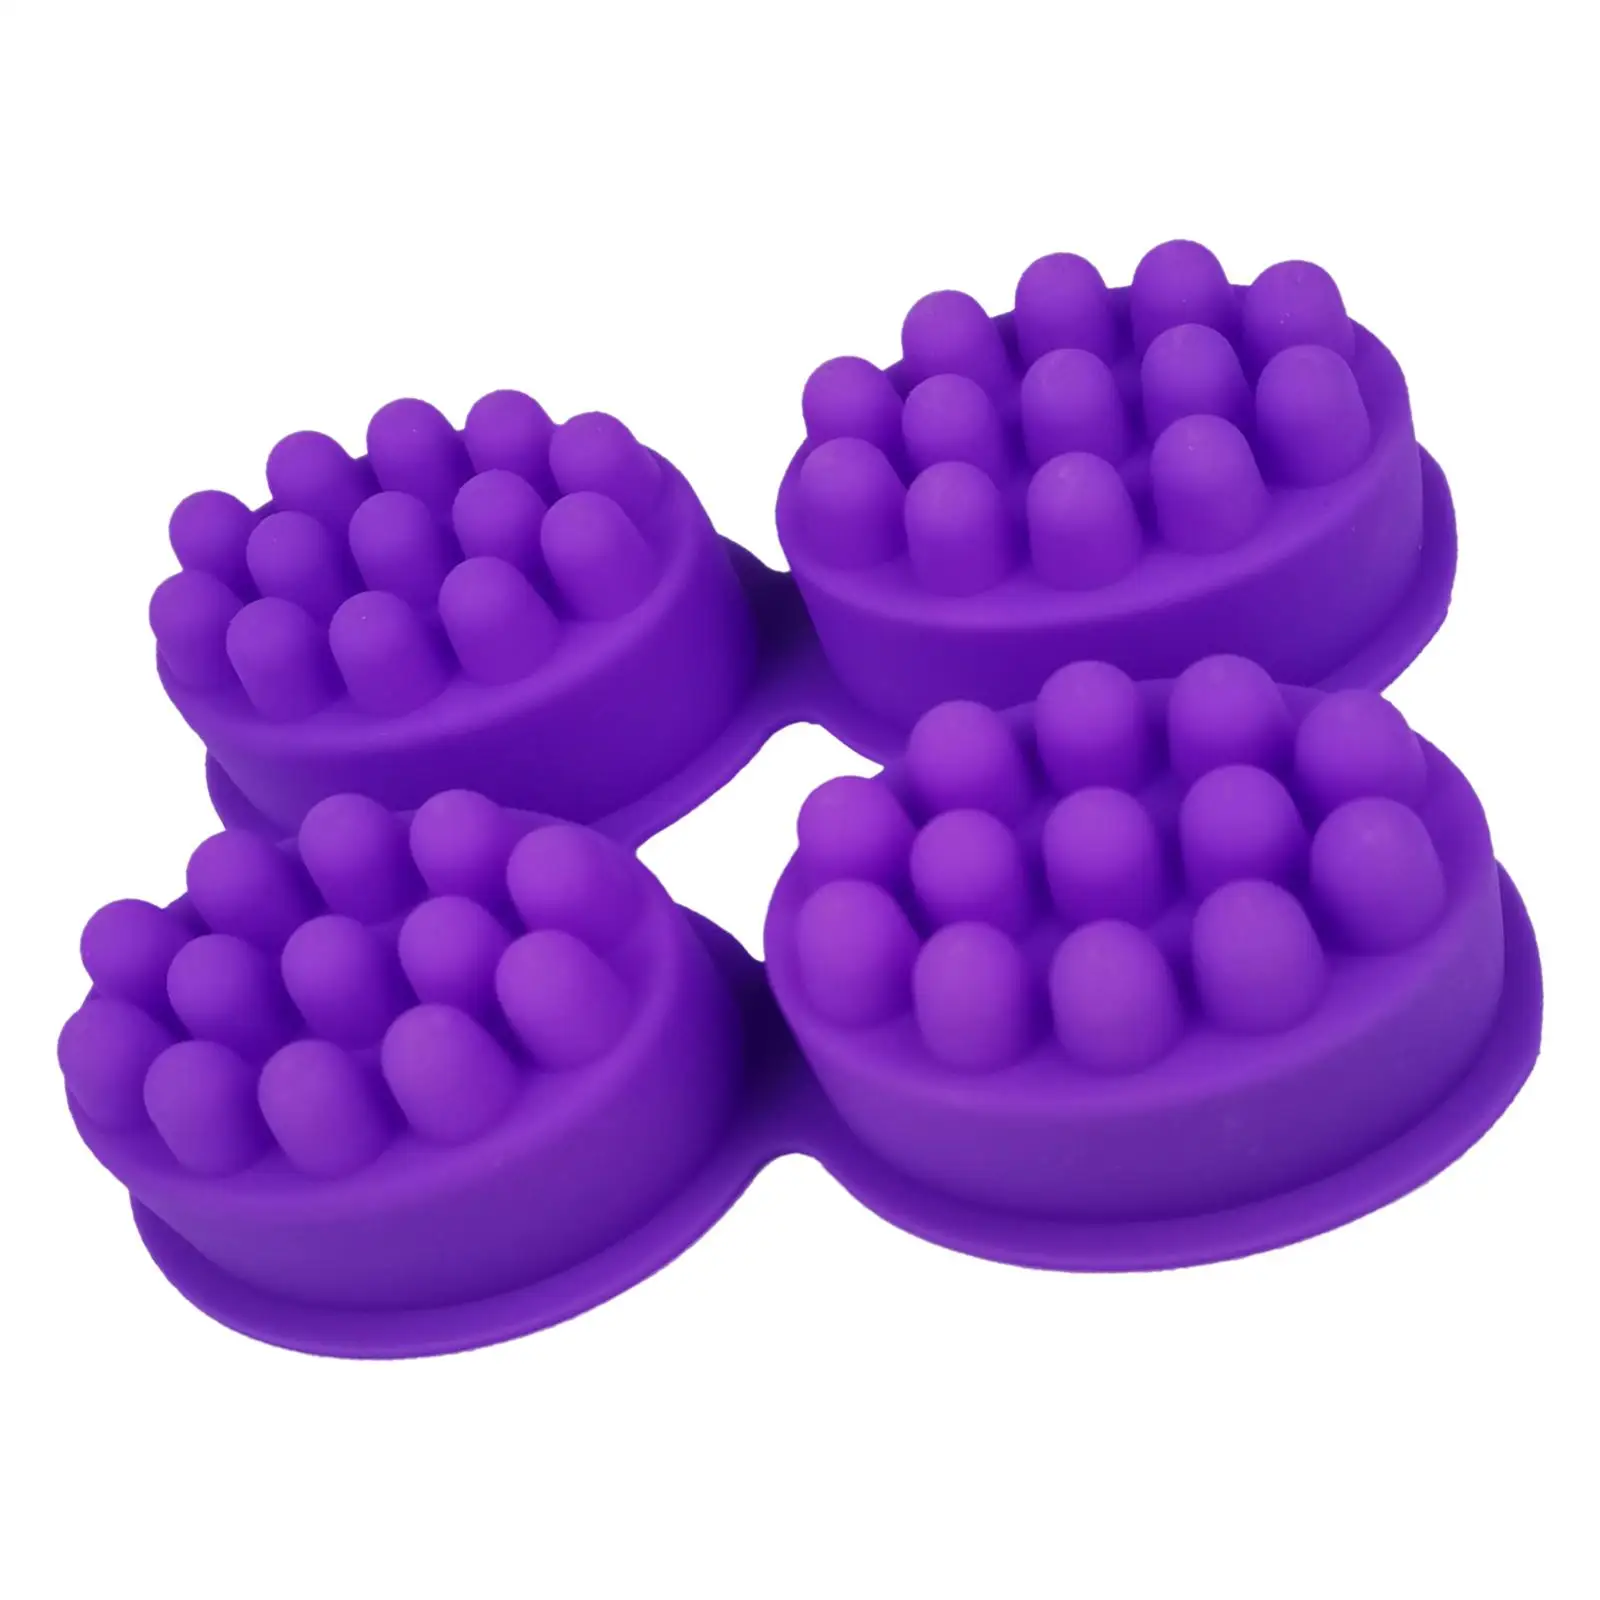 Ellipse Silicone Massage Soap 4 Cavities for Candle, Pudding, Baking DIY Oval Handicrafts 3D Silicone Handmade Soap ,